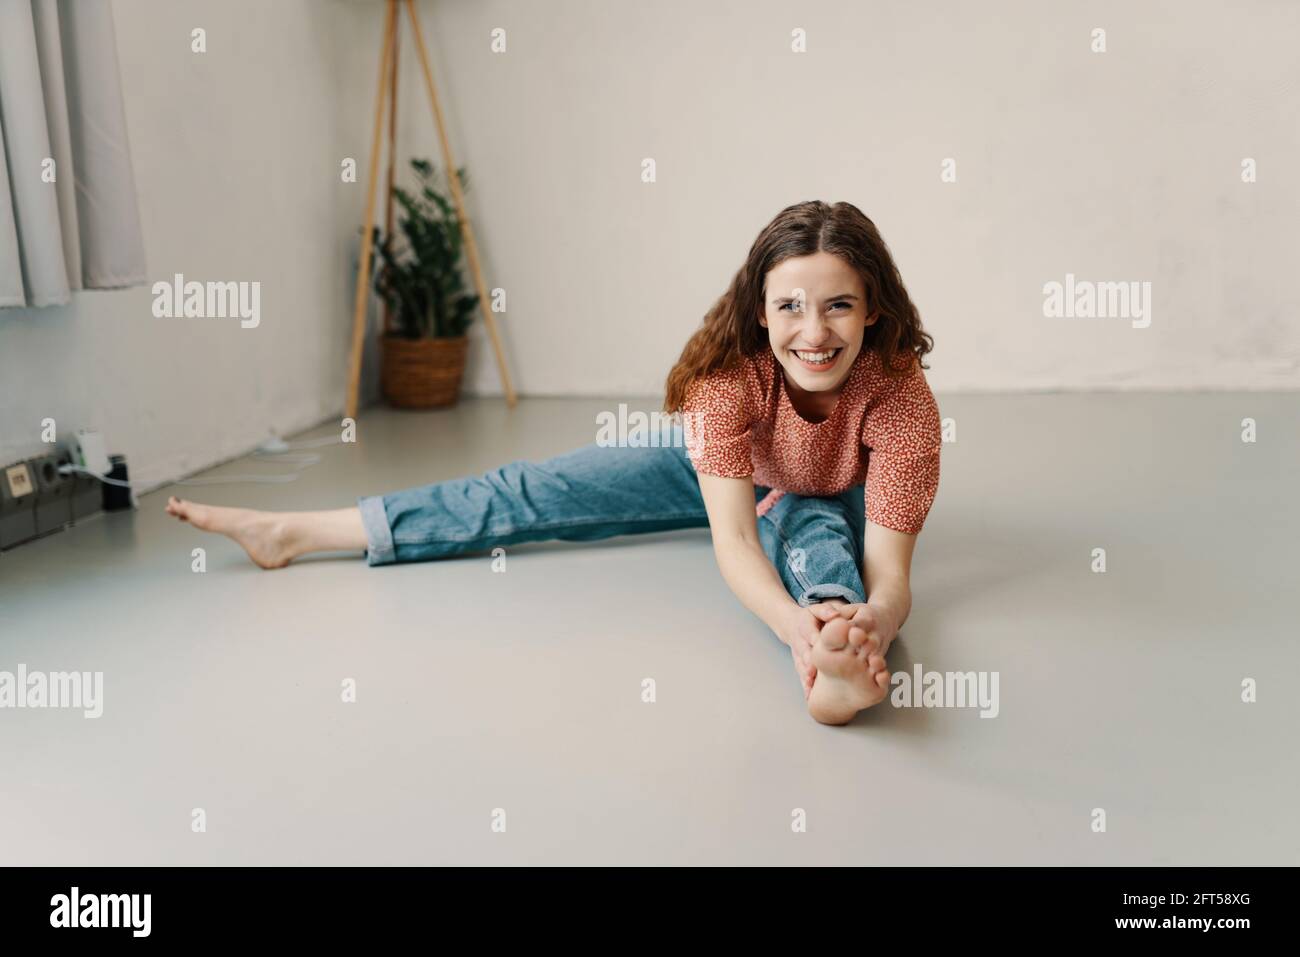 Vivacious young woman working at doing stretching exercises barefoot on the floor at home reaching forwards to grasp her toes as she smiles happily at Stock Photo